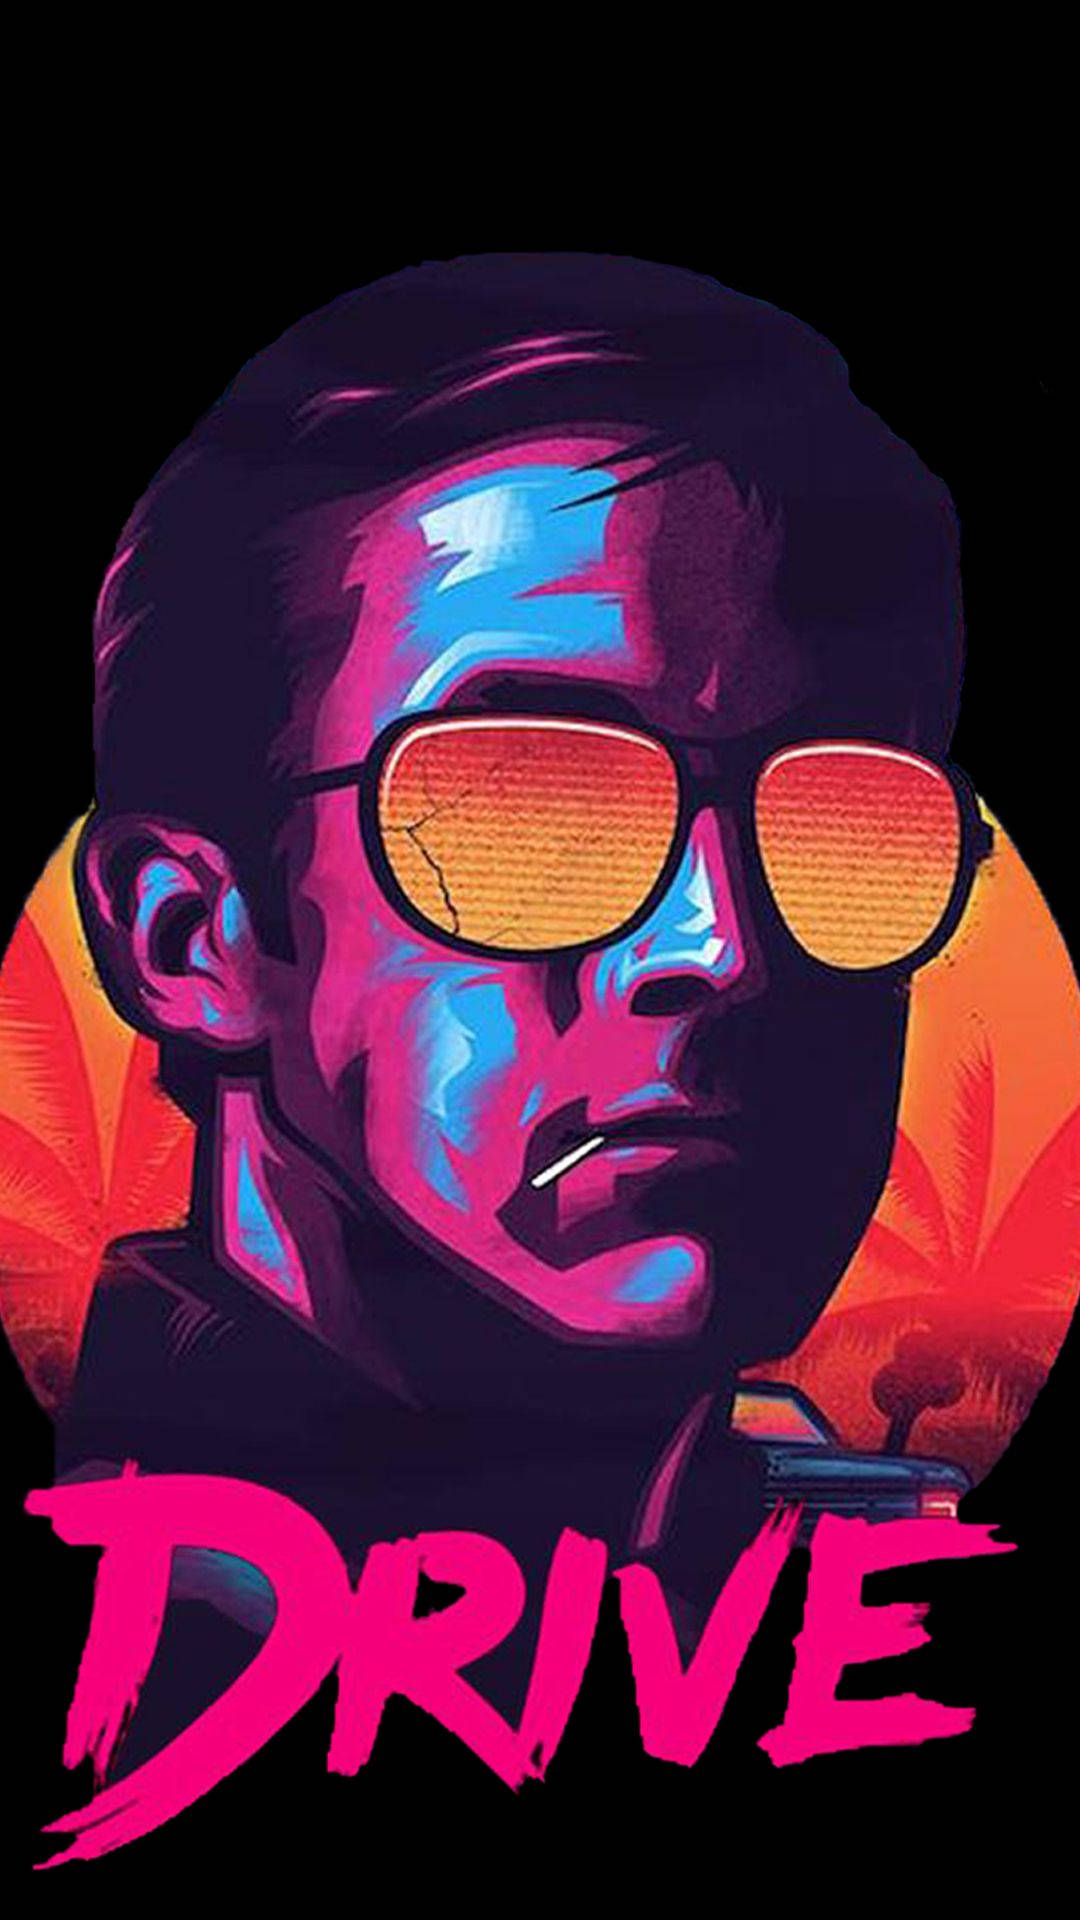 Drive Movie 80s Themed Cover Background